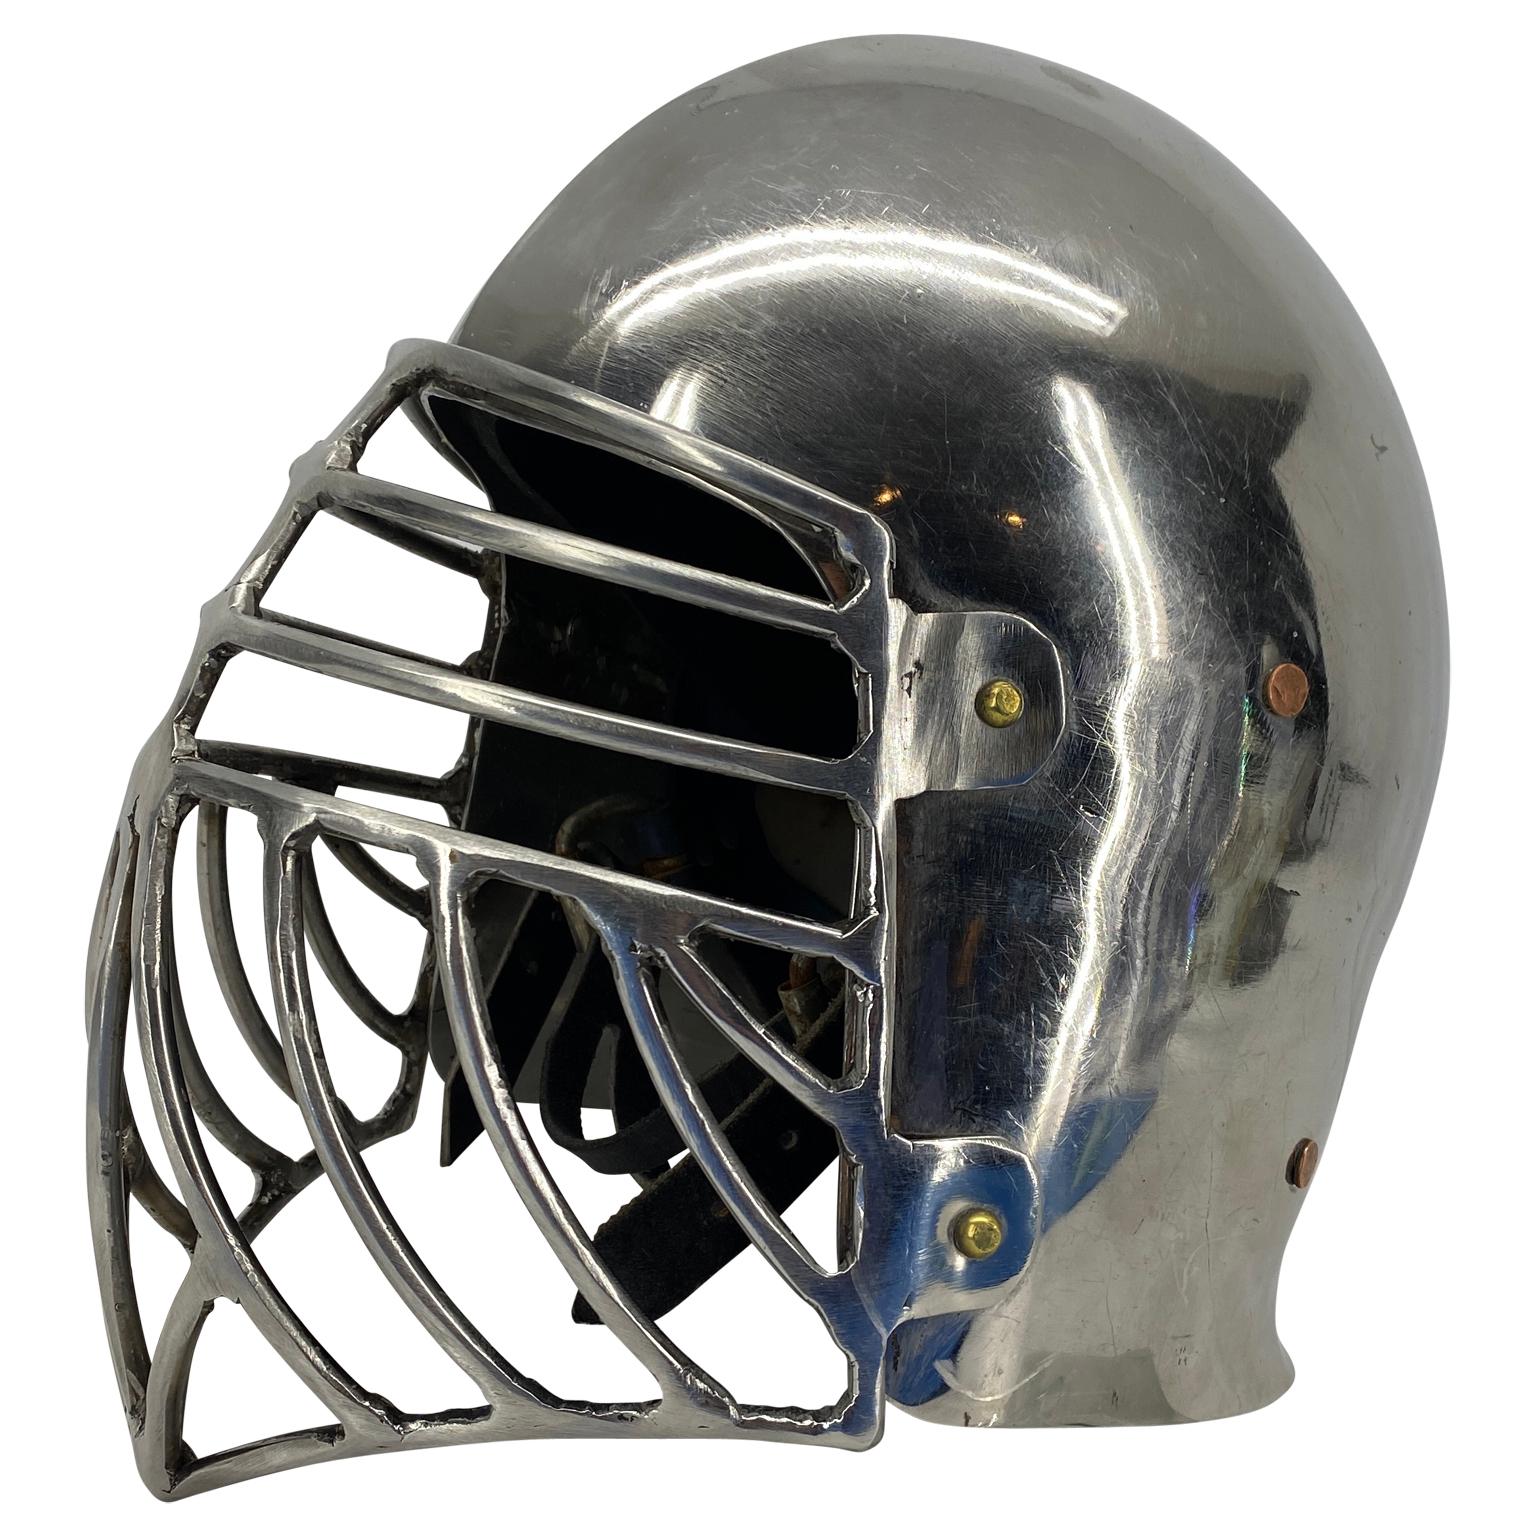 Post modern polished chrome Viking helmet.
The only known Viking helmet with the possibility of reconstruction was found in Norway. This great archeological find inspired the Norseman Helmet. This helmet covers the cheeks in addition to the eyes